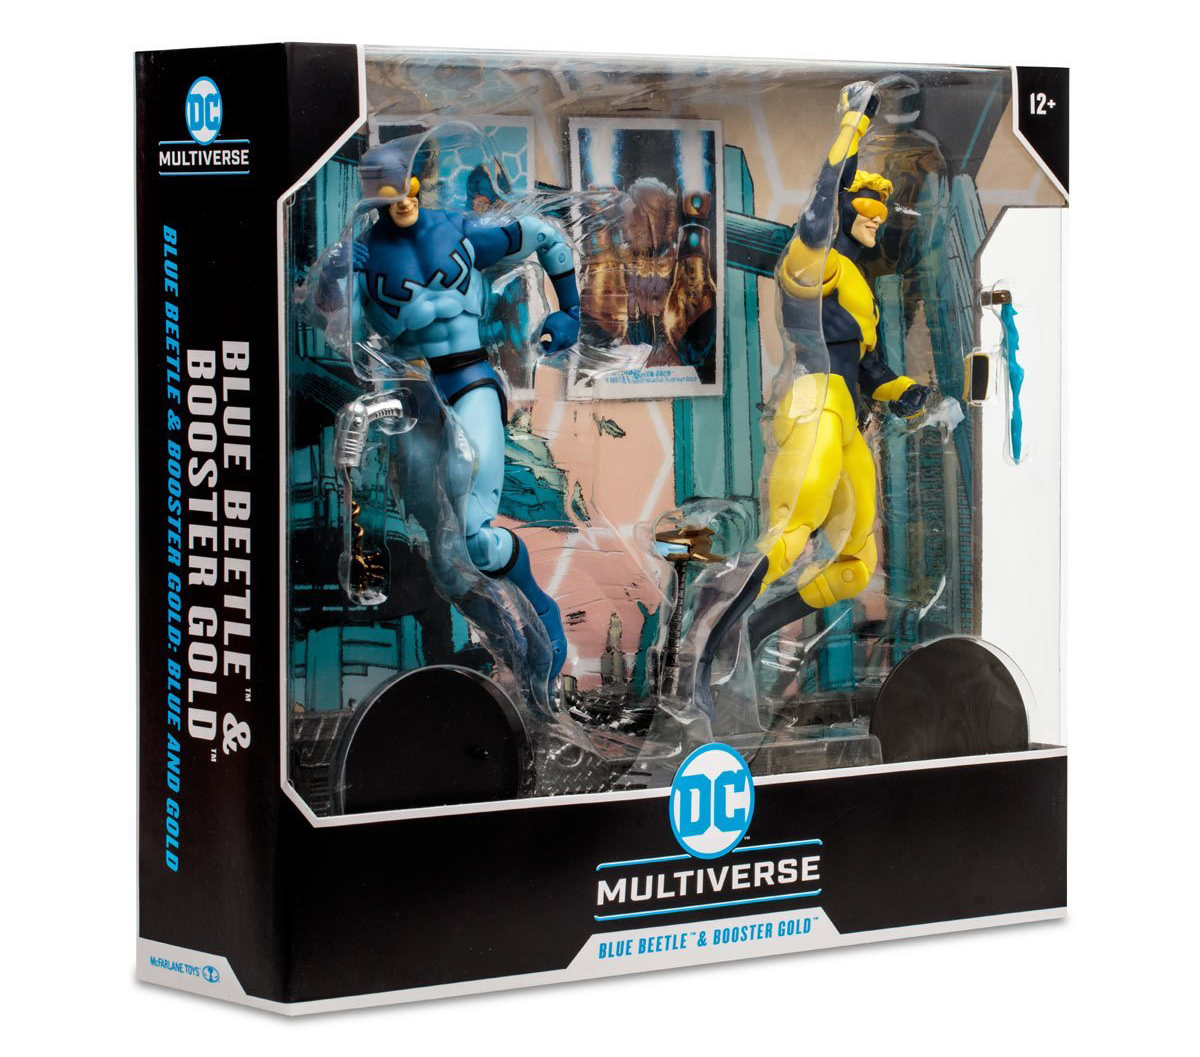 blue-beetle-booster-gold-dc-multiverse-action-figure-2-pack-packaging-box-art-2